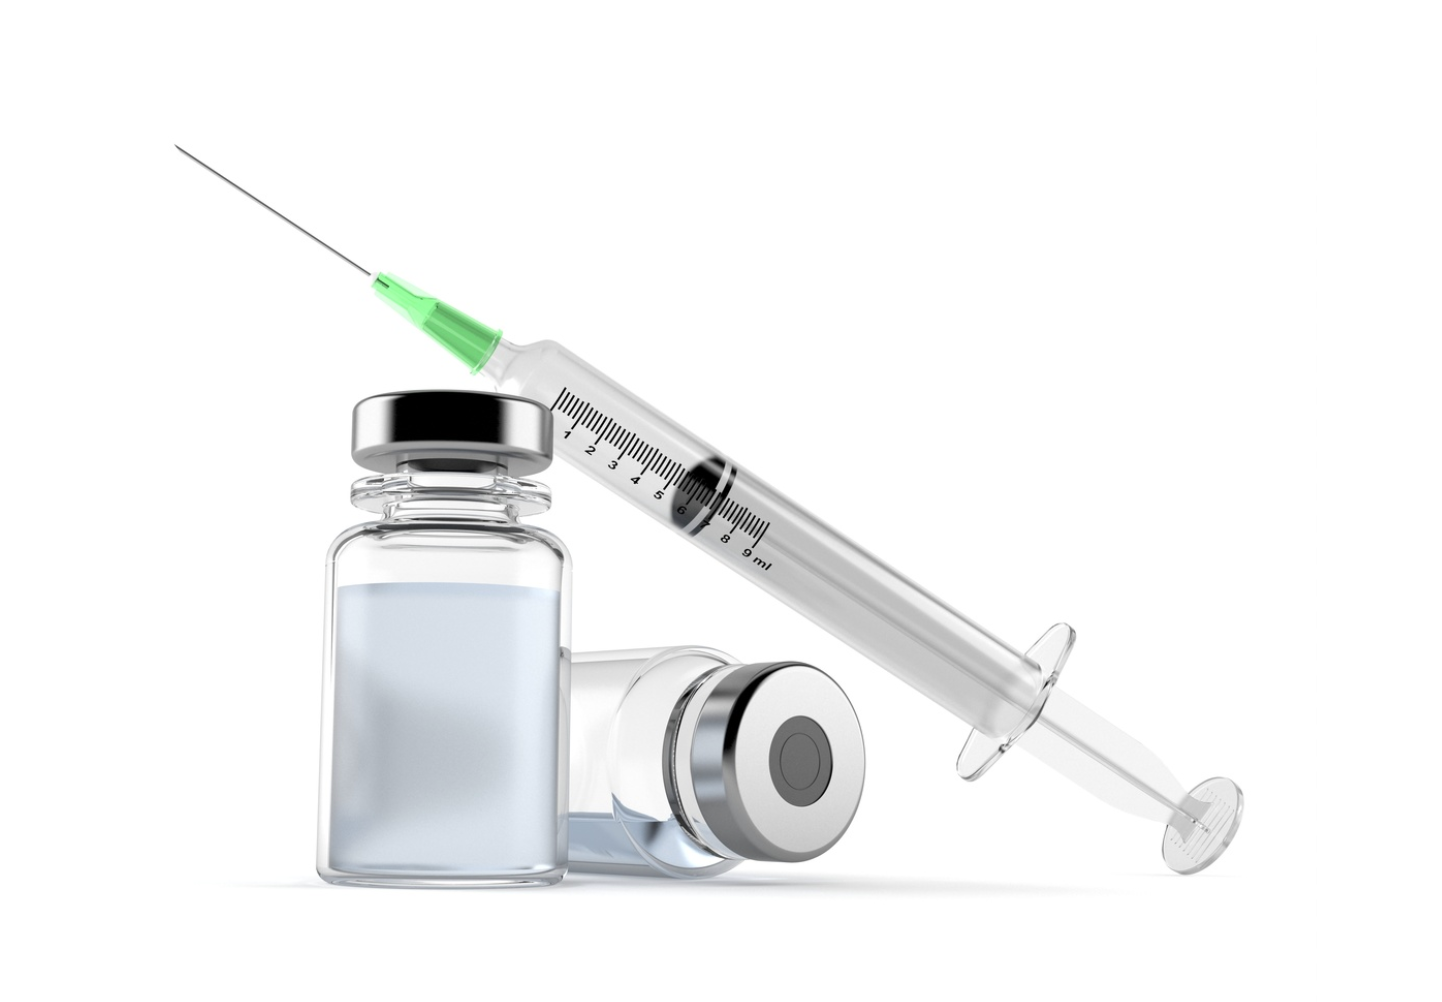 Recombinant Zoster Vaccine May Slightly Increase Risk of Guillain-Barré Syndrome